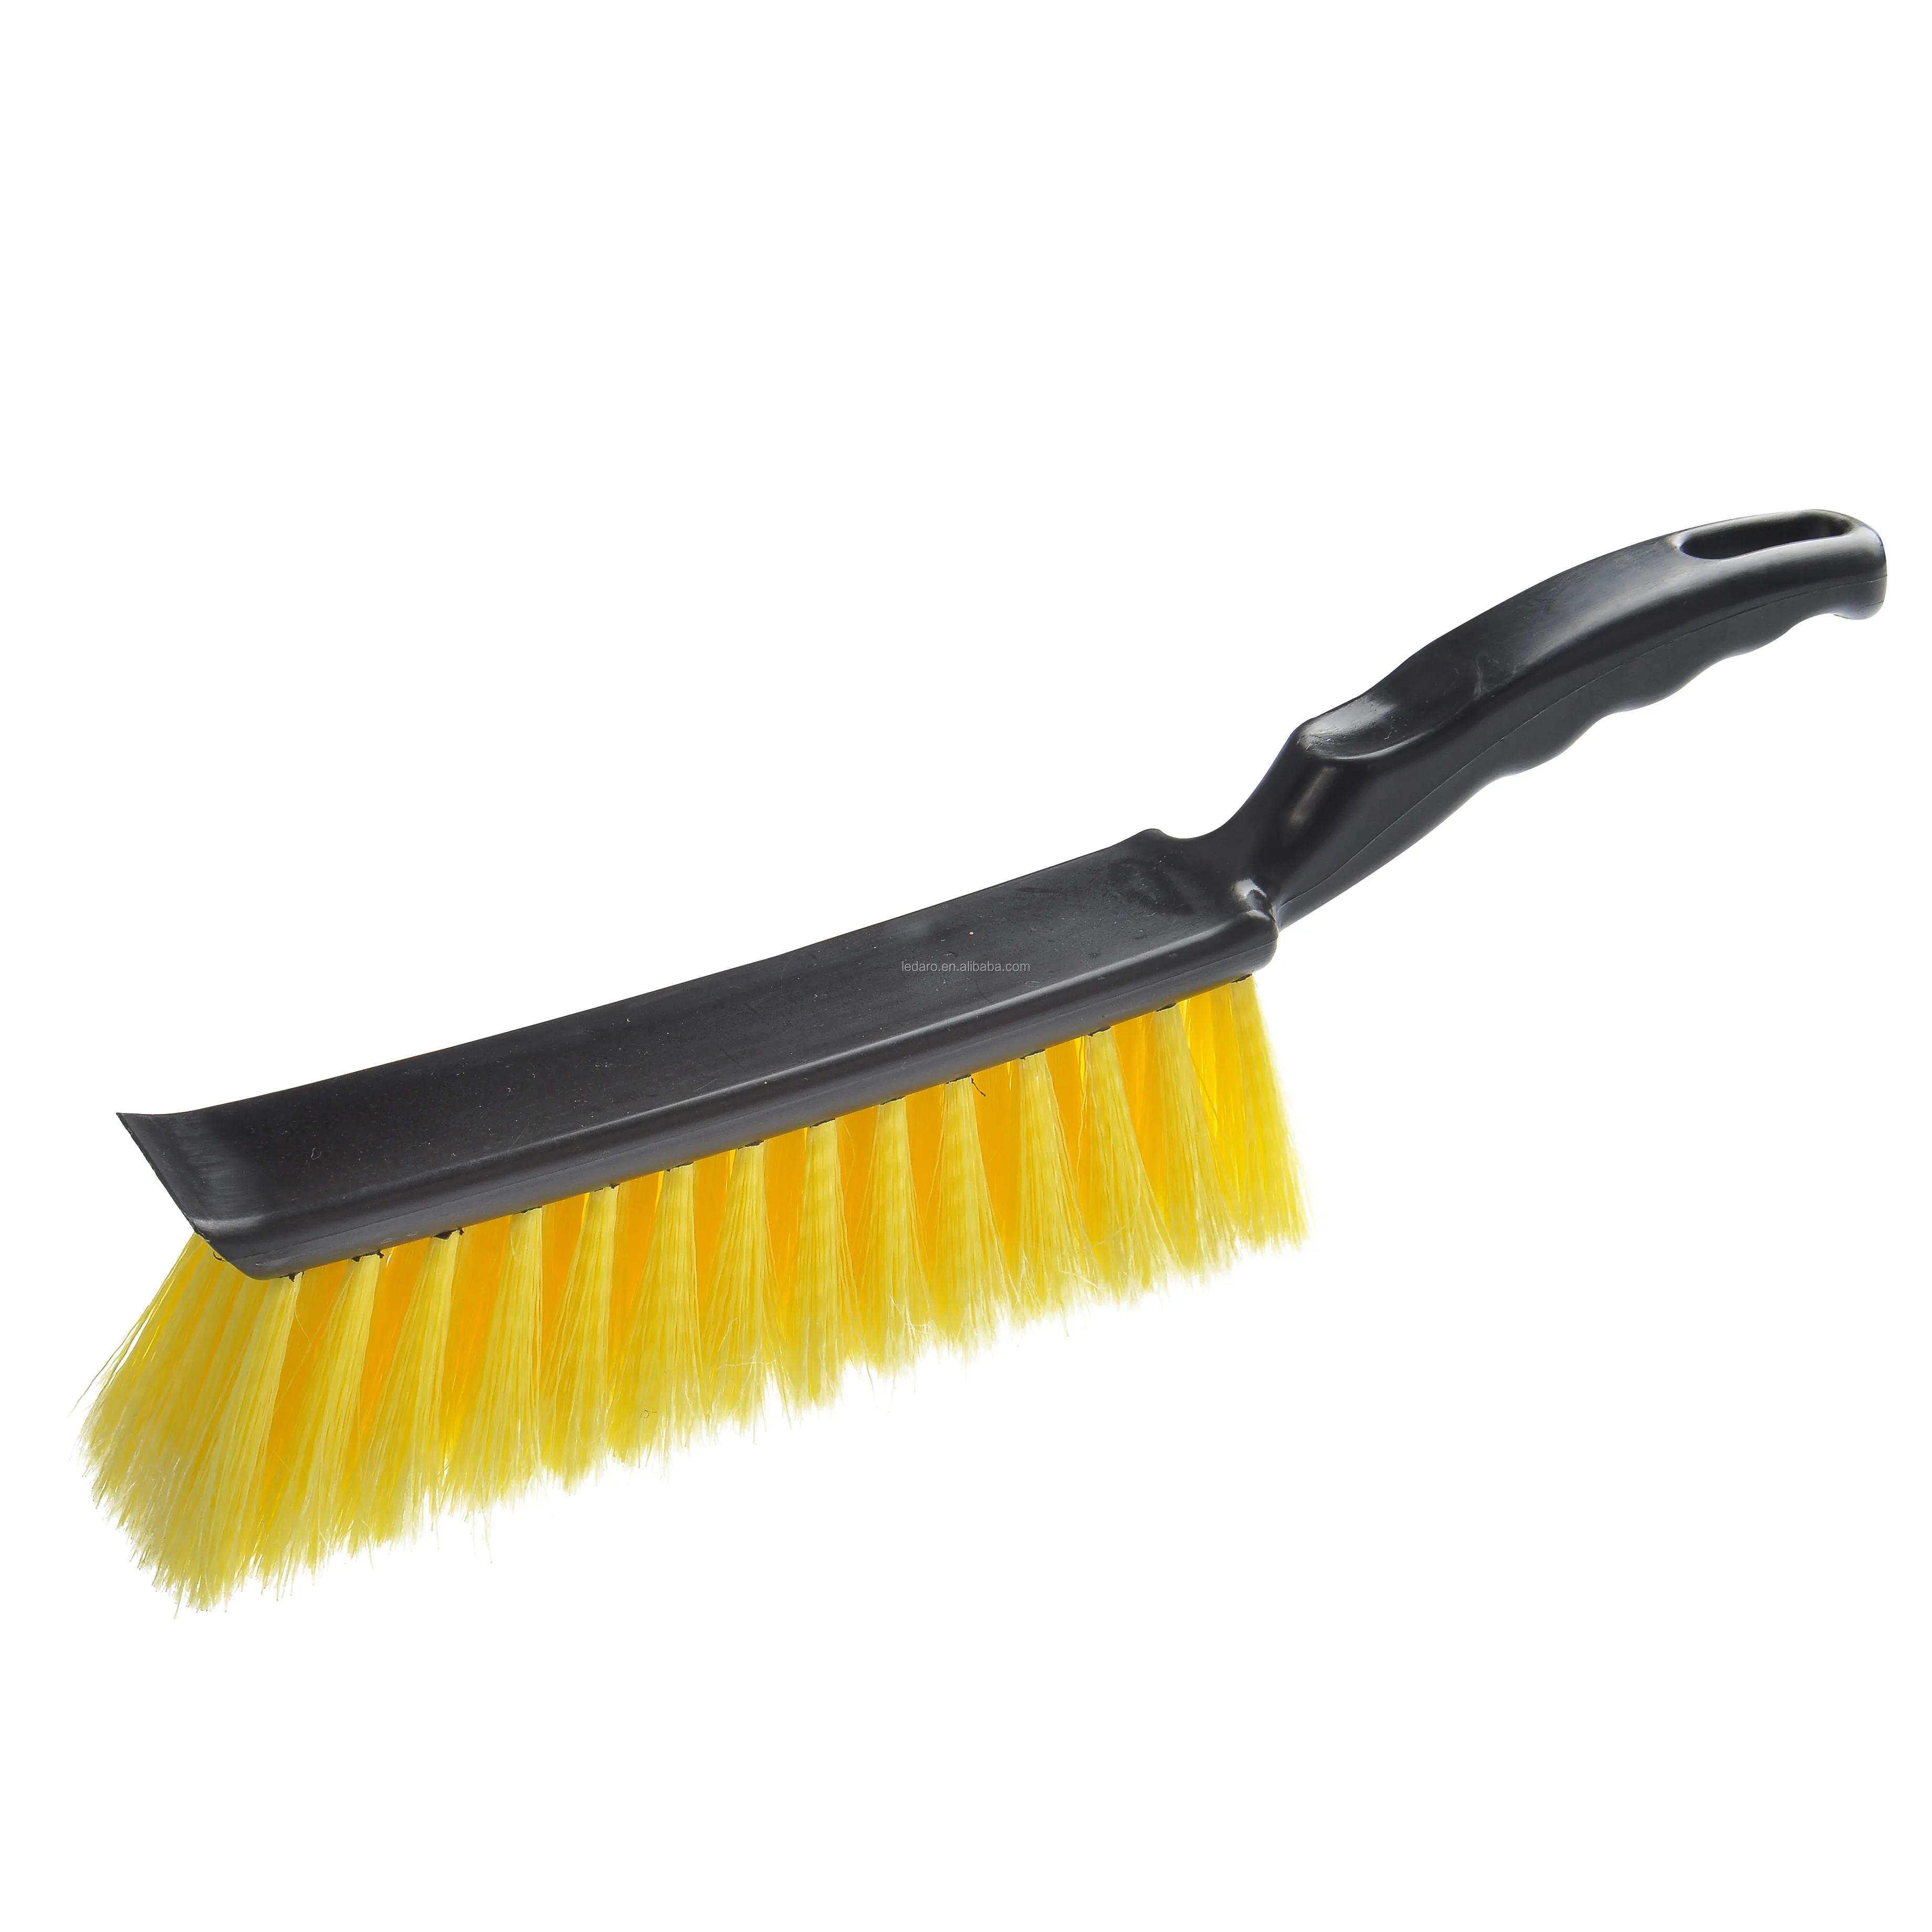 Dust Cleaning Brush for Home